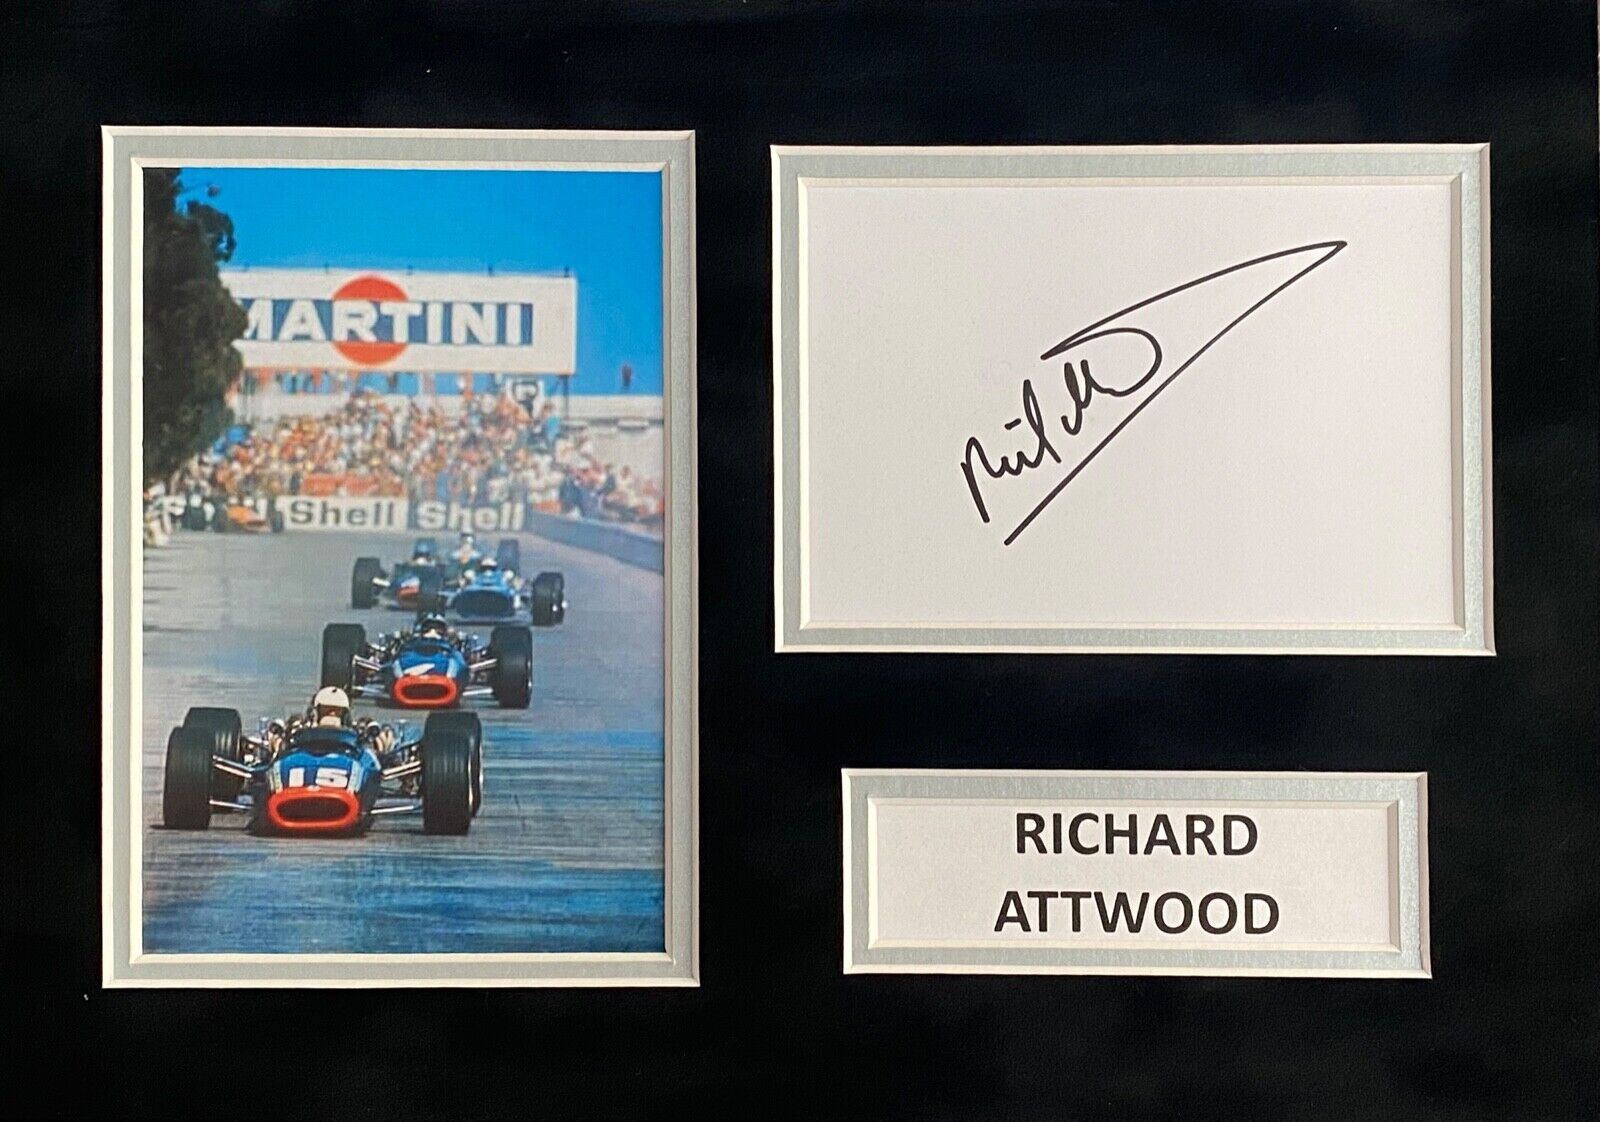 RICHARD ATTWOOD SIGNED A4 Photo Poster painting MOUNT DISPLAY LE MANS AUTOGRAPH F1 RACING 1